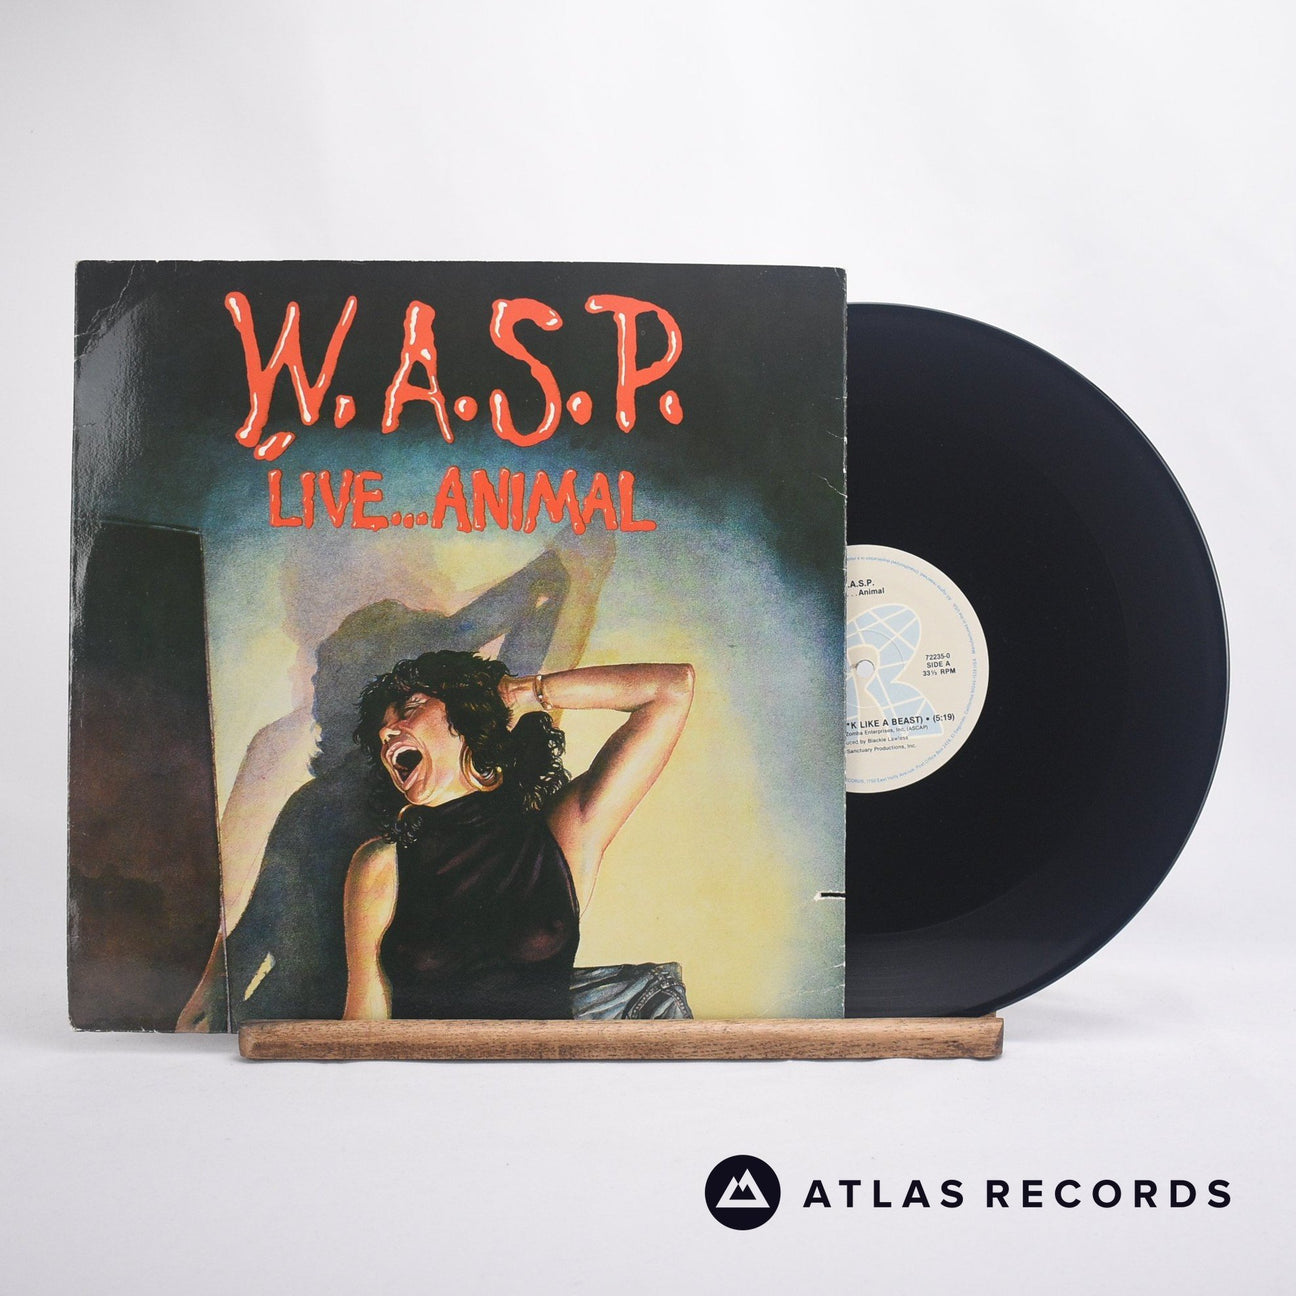 W.A.S.P. Live...Animal 12" Vinyl Record - Front Cover & Record